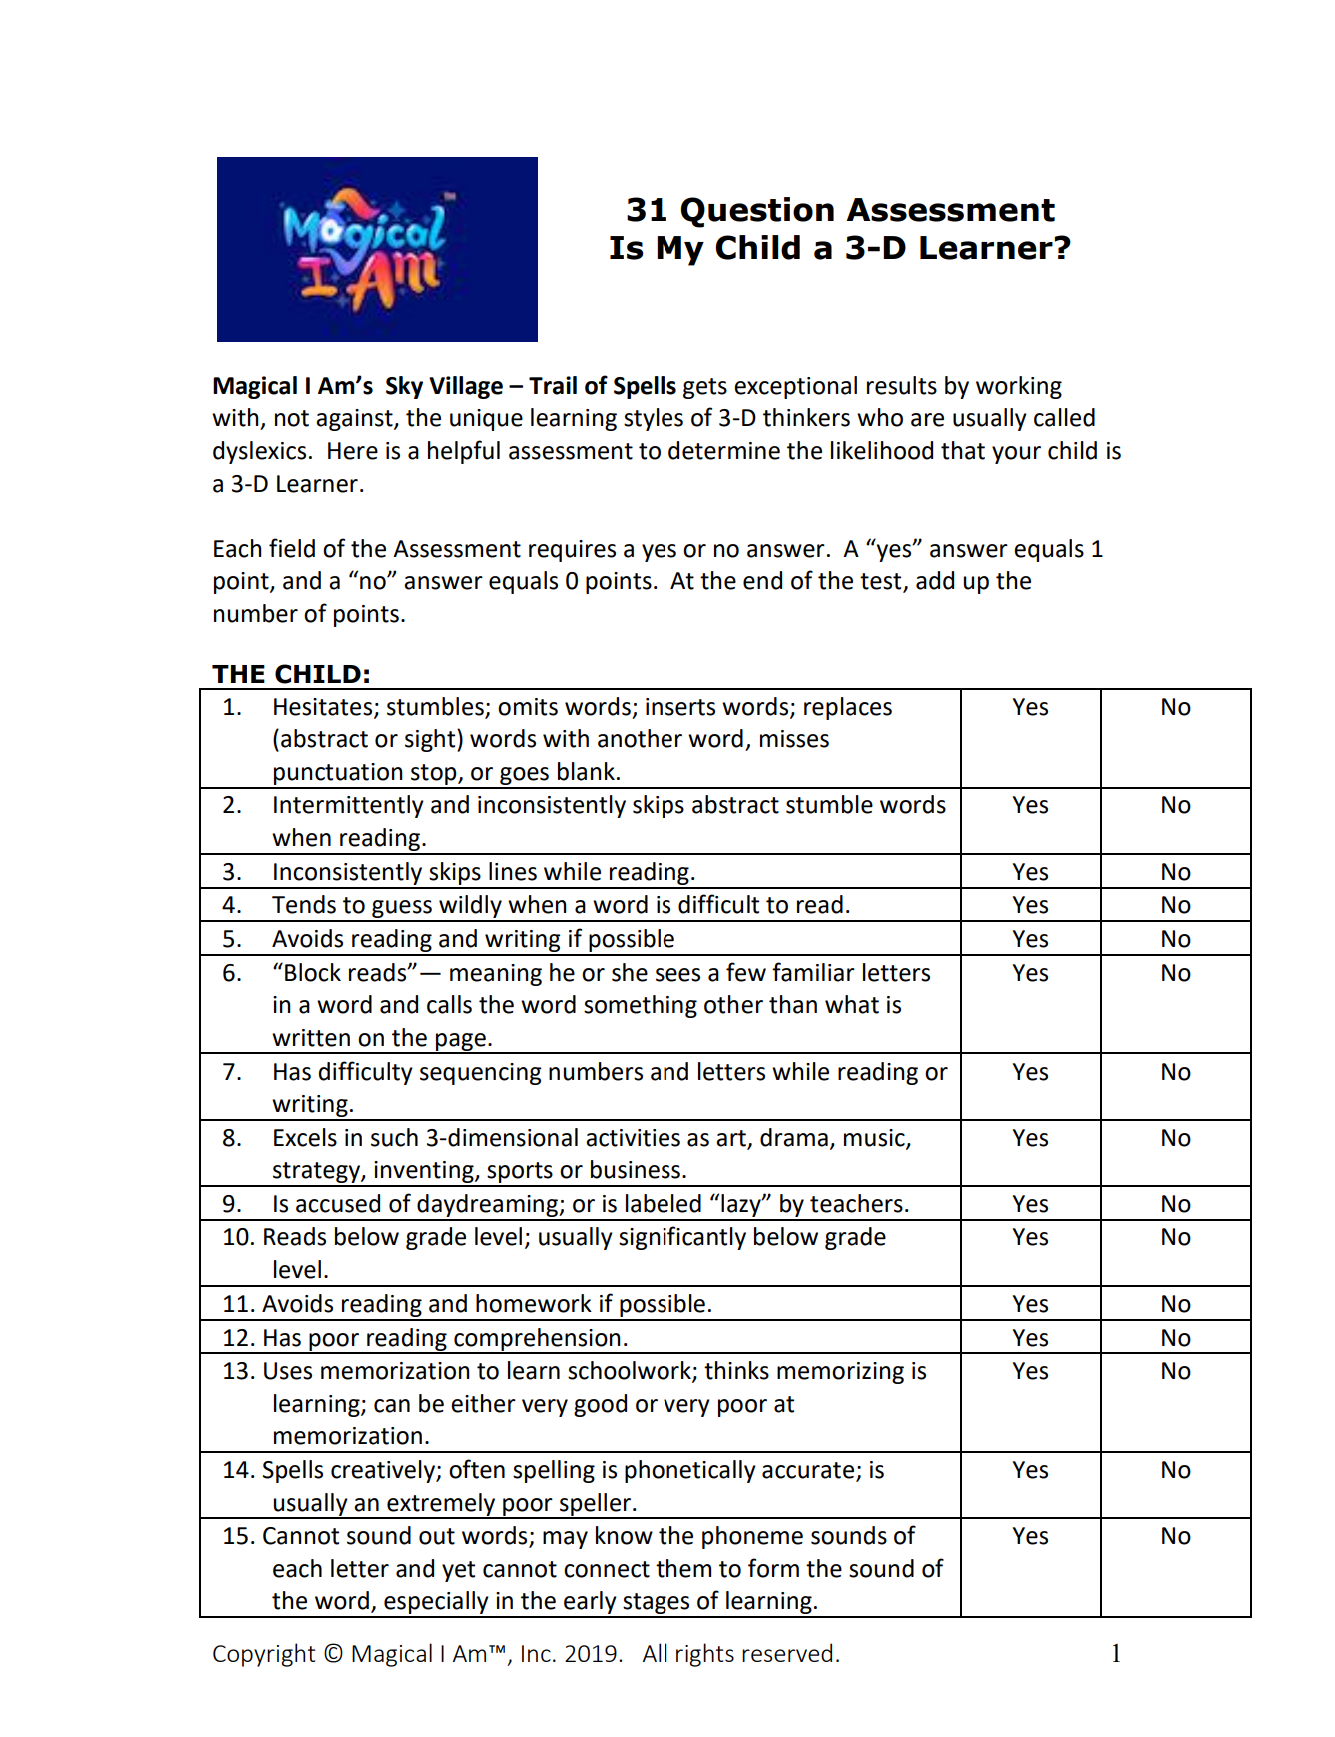 Dyslexic 3-D Learner Assessment page 1